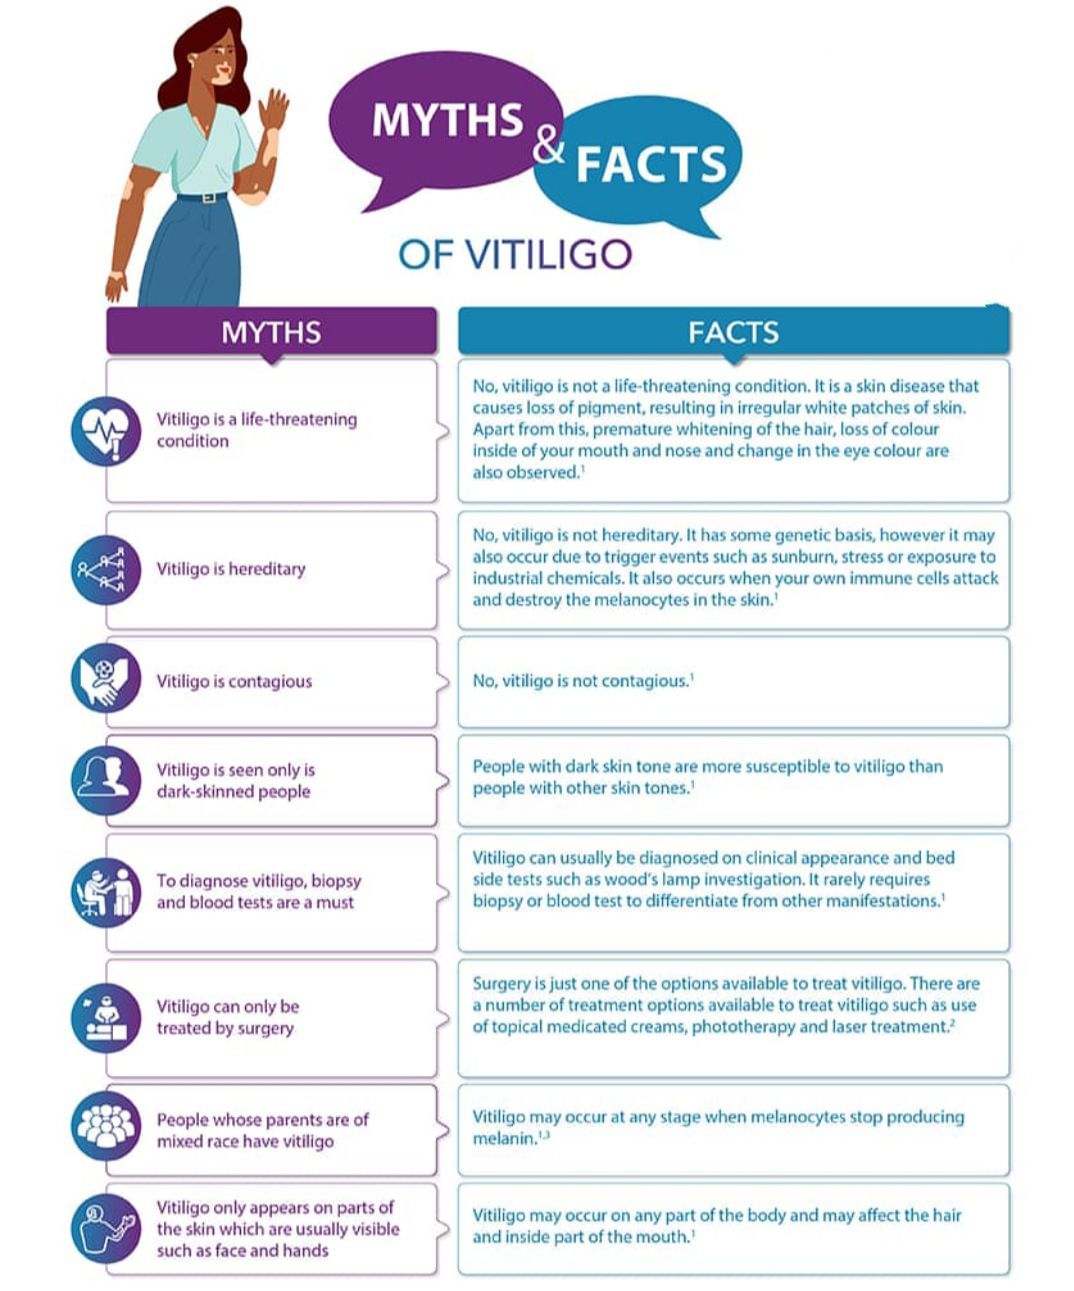 Myths And Facts About Vitiligo!